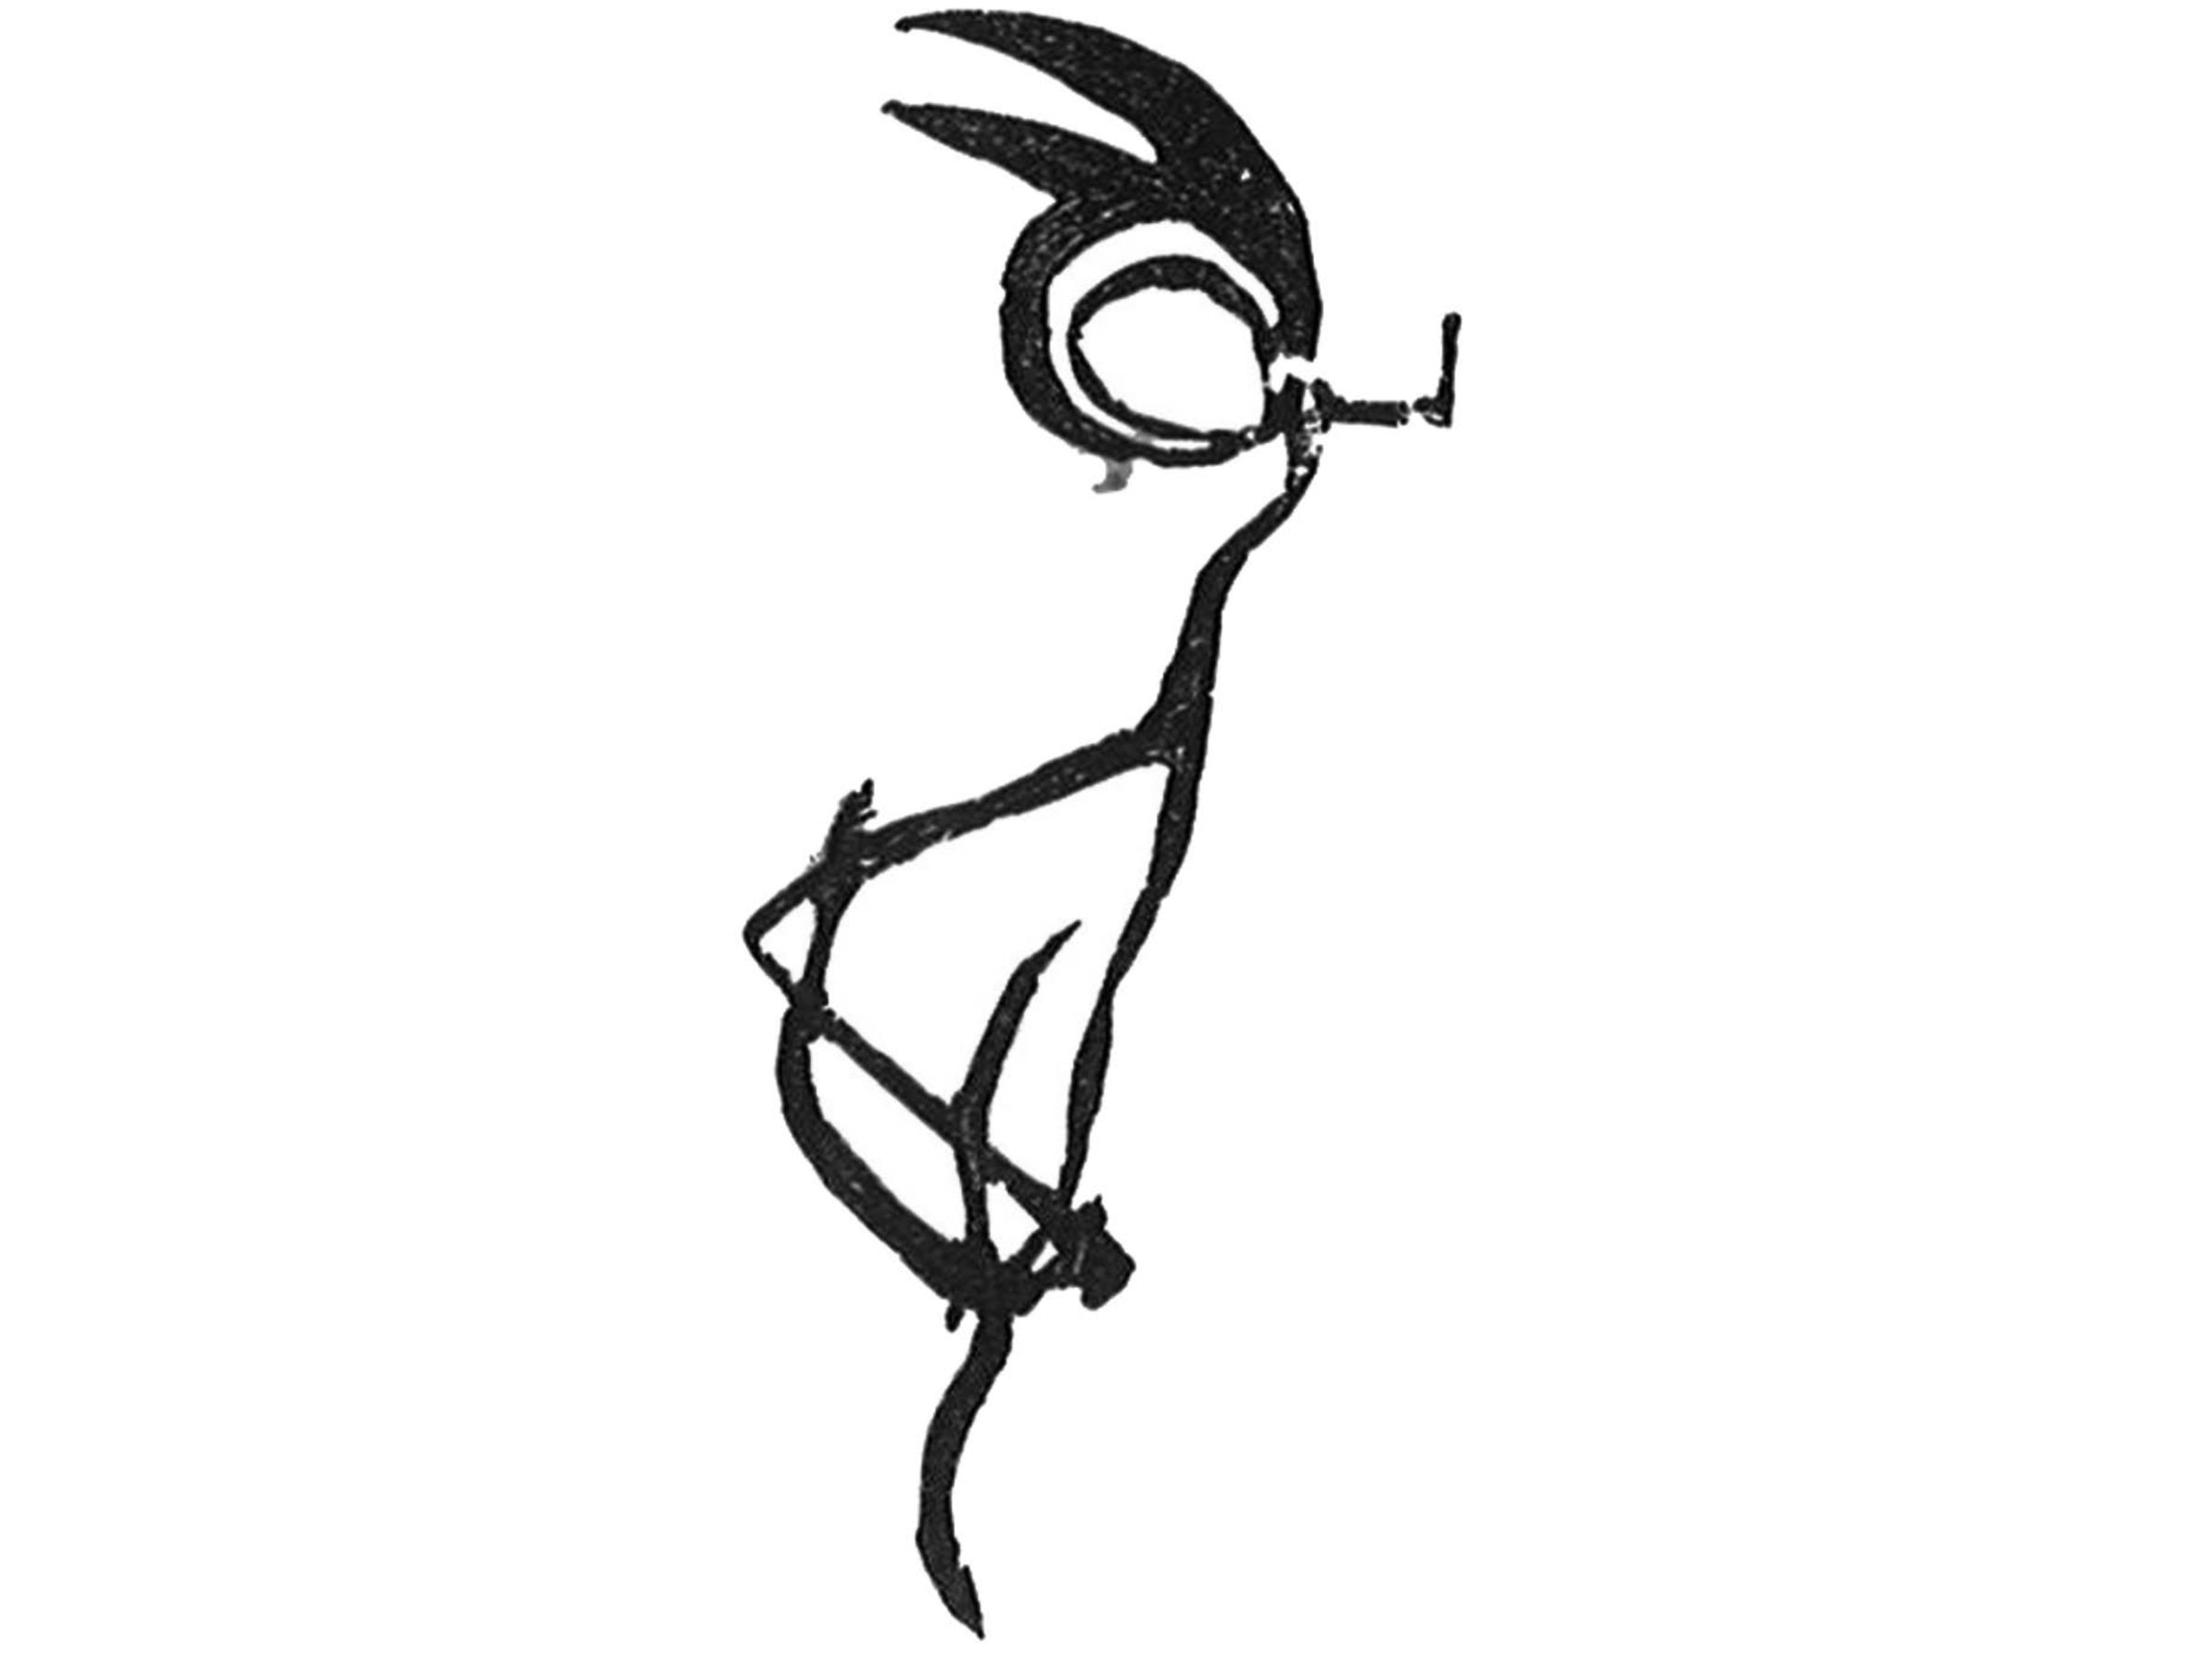 I Became a FERAL CREATURE in Stick It To The Stickman 